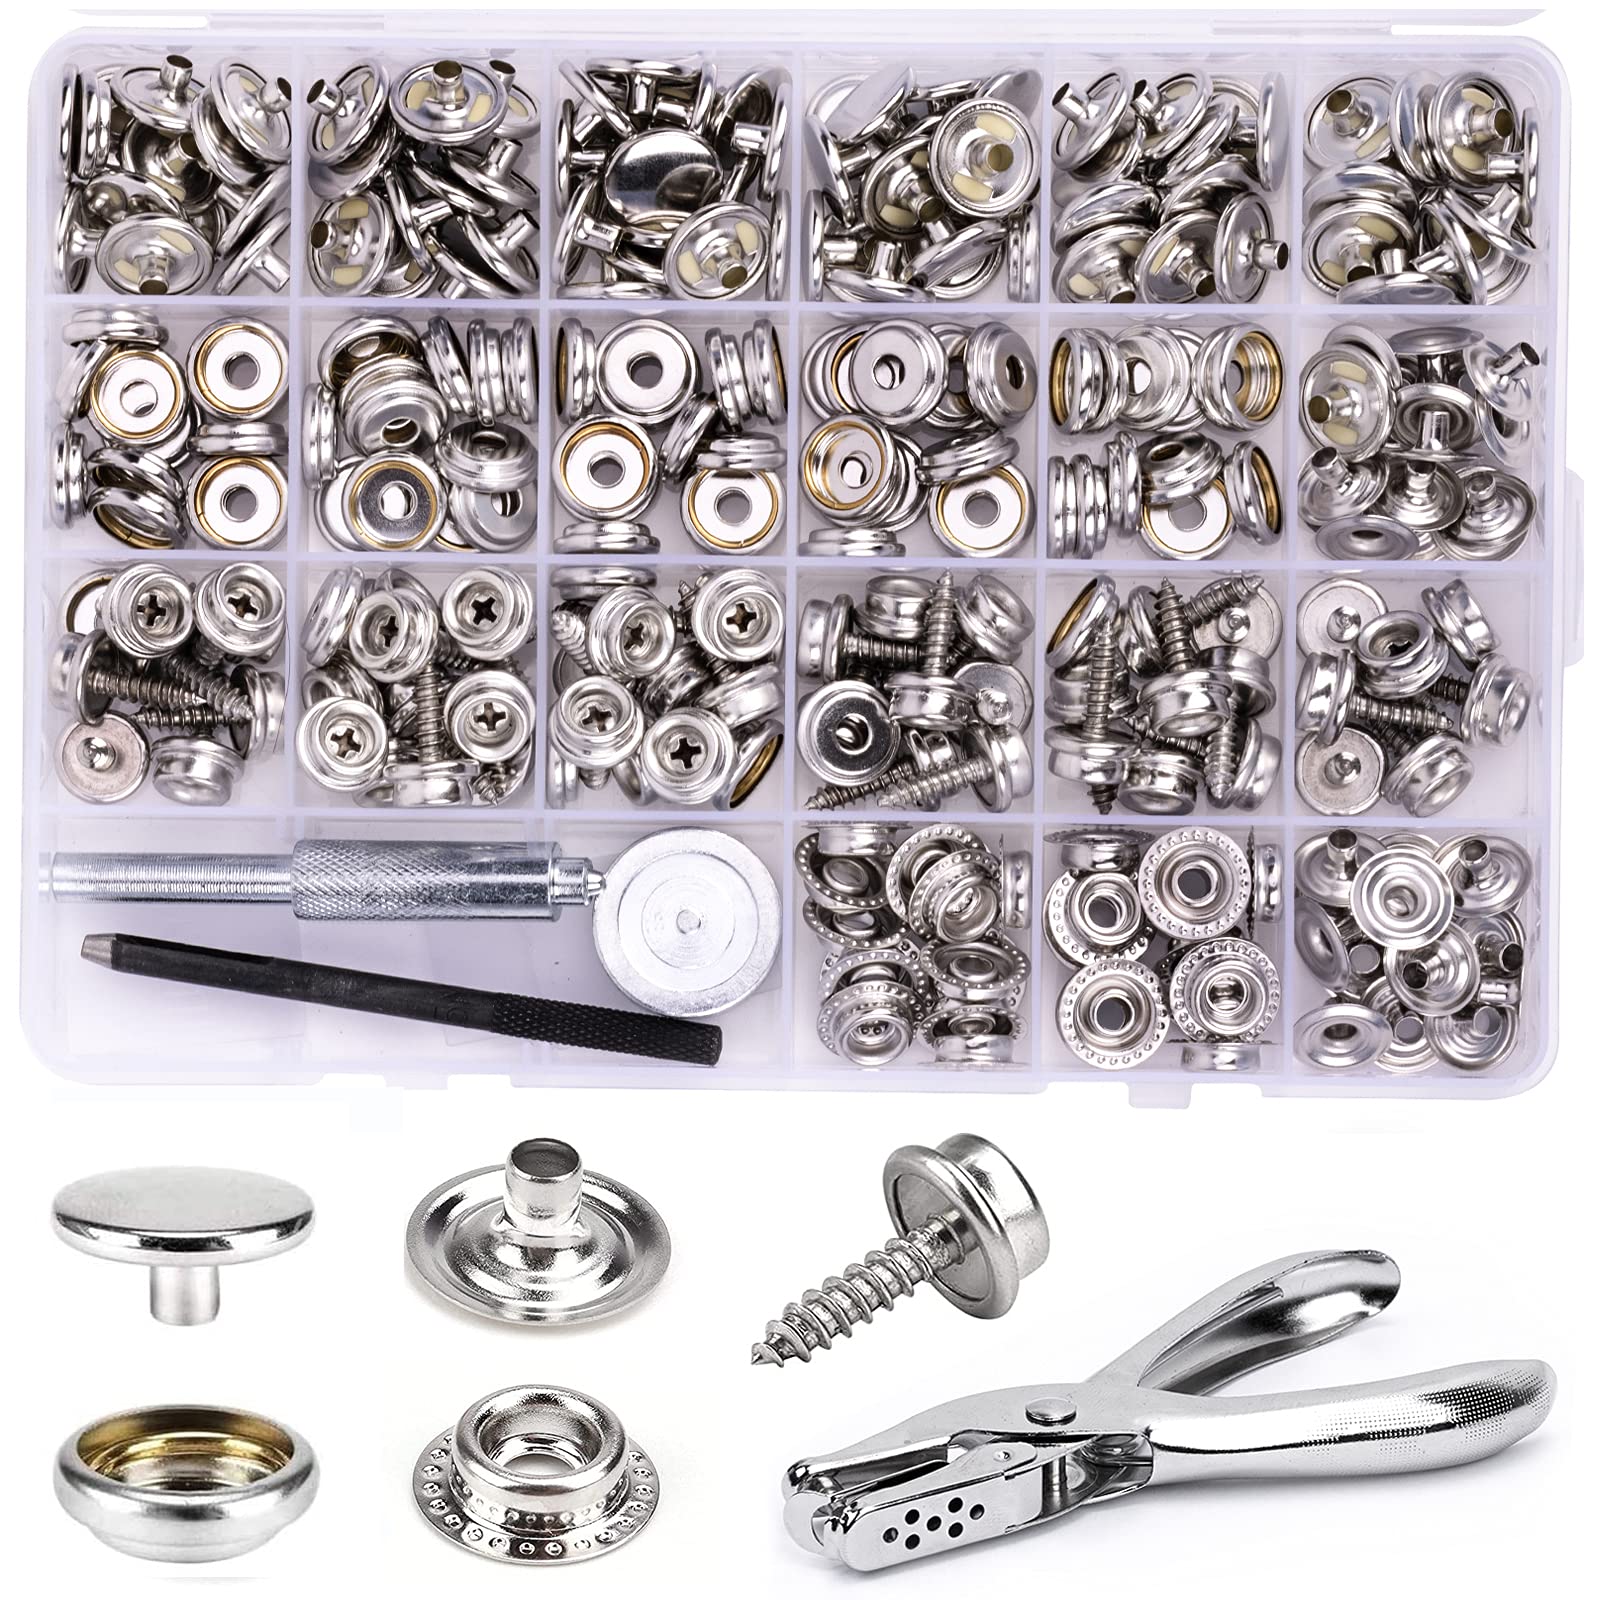 How to Use Yofuly Snap Fasteners Kit 